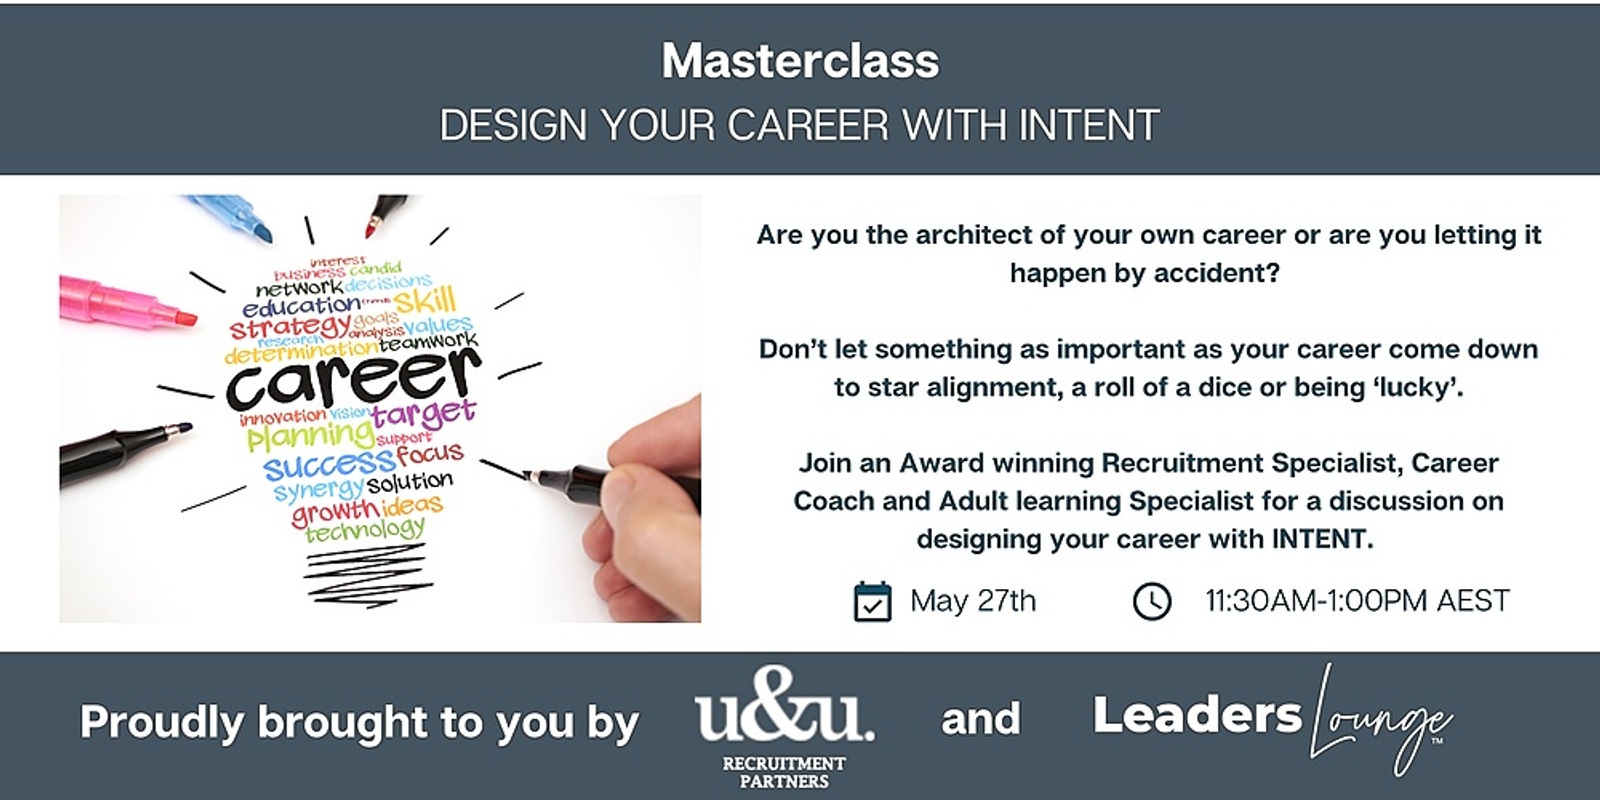 DESIGN YOUR CAREER WITH INTENT